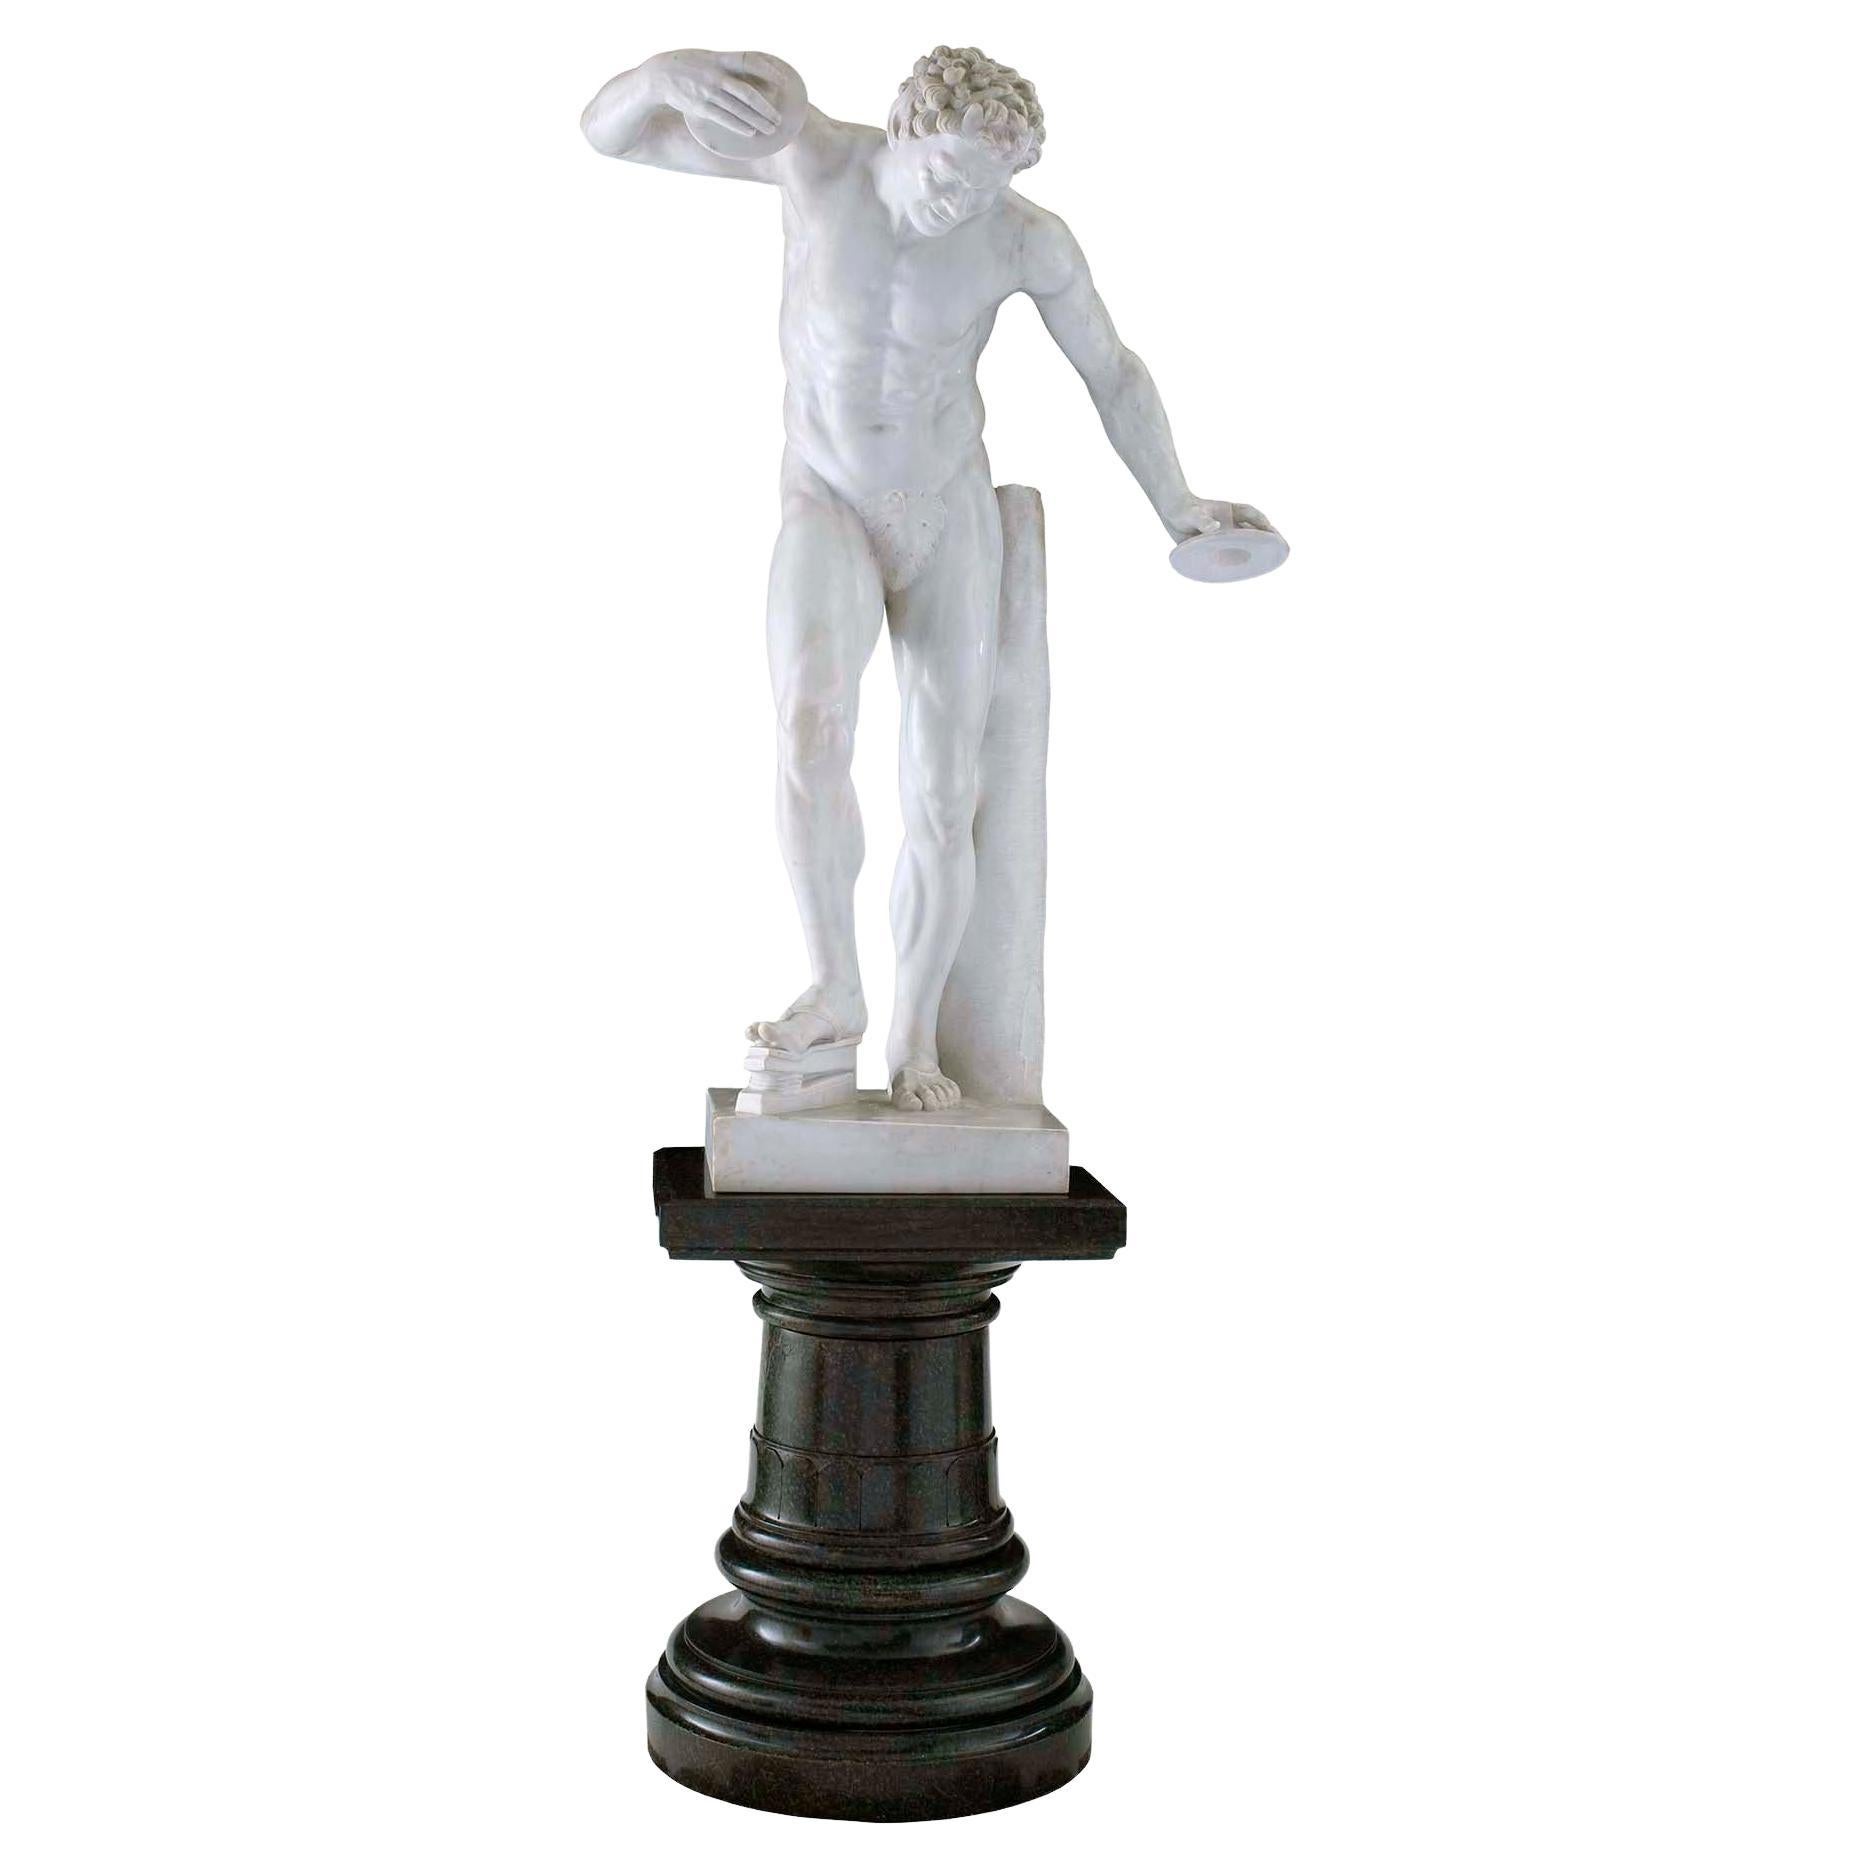 Italian 19th Century Neoclassical Style Marble Statue of a Faun with Cymbals For Sale